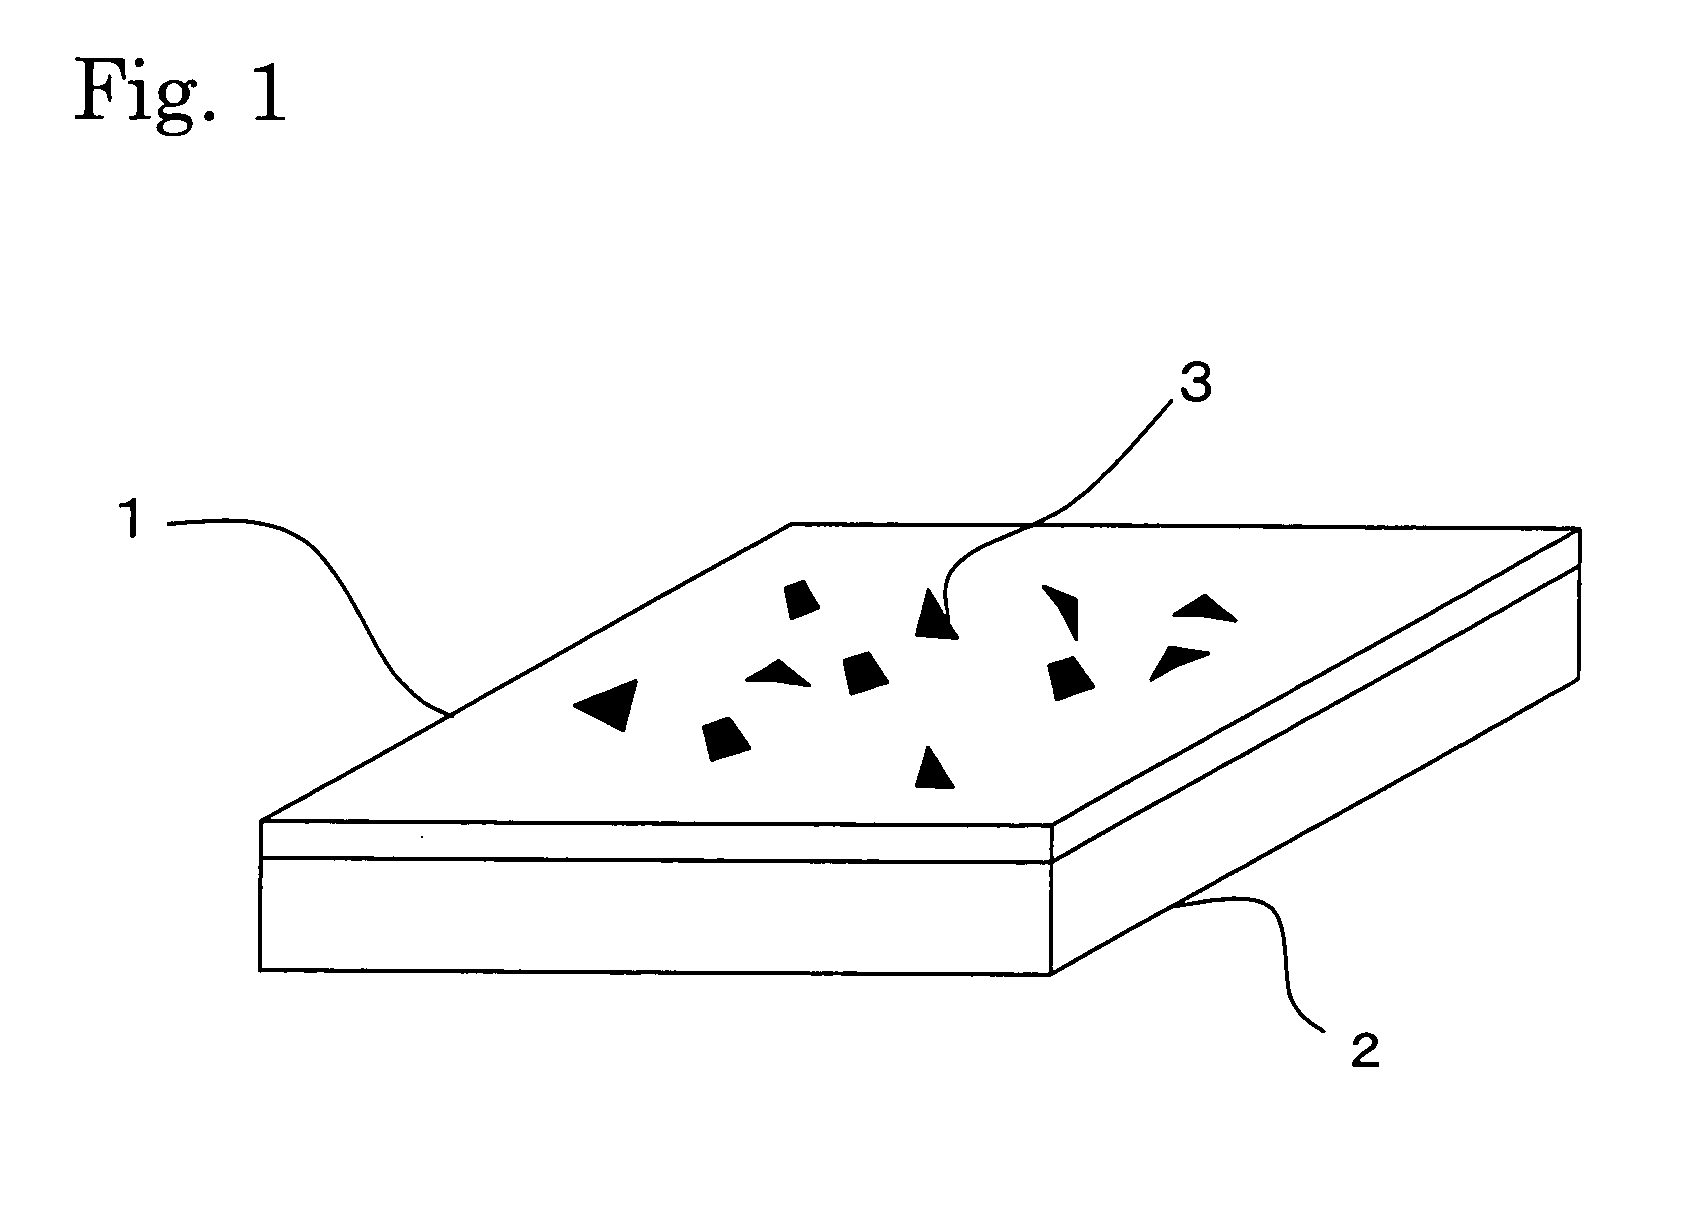 Gas decomposing unit, electrode for a fuel cell, and method of manufacturing the gas decomposing unit